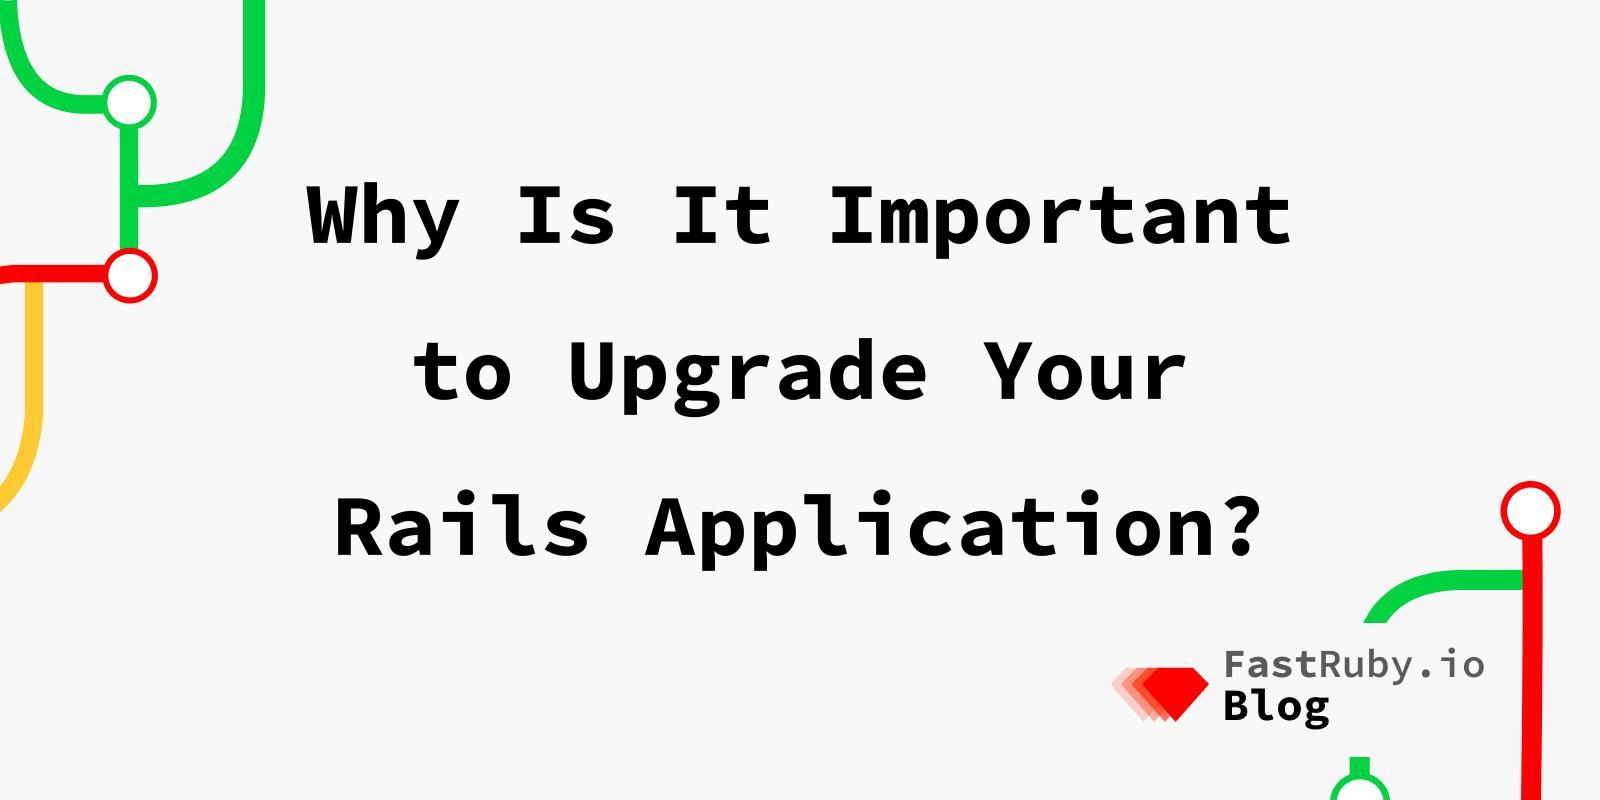 Why Is It Important to Upgrade Your Rails Application?